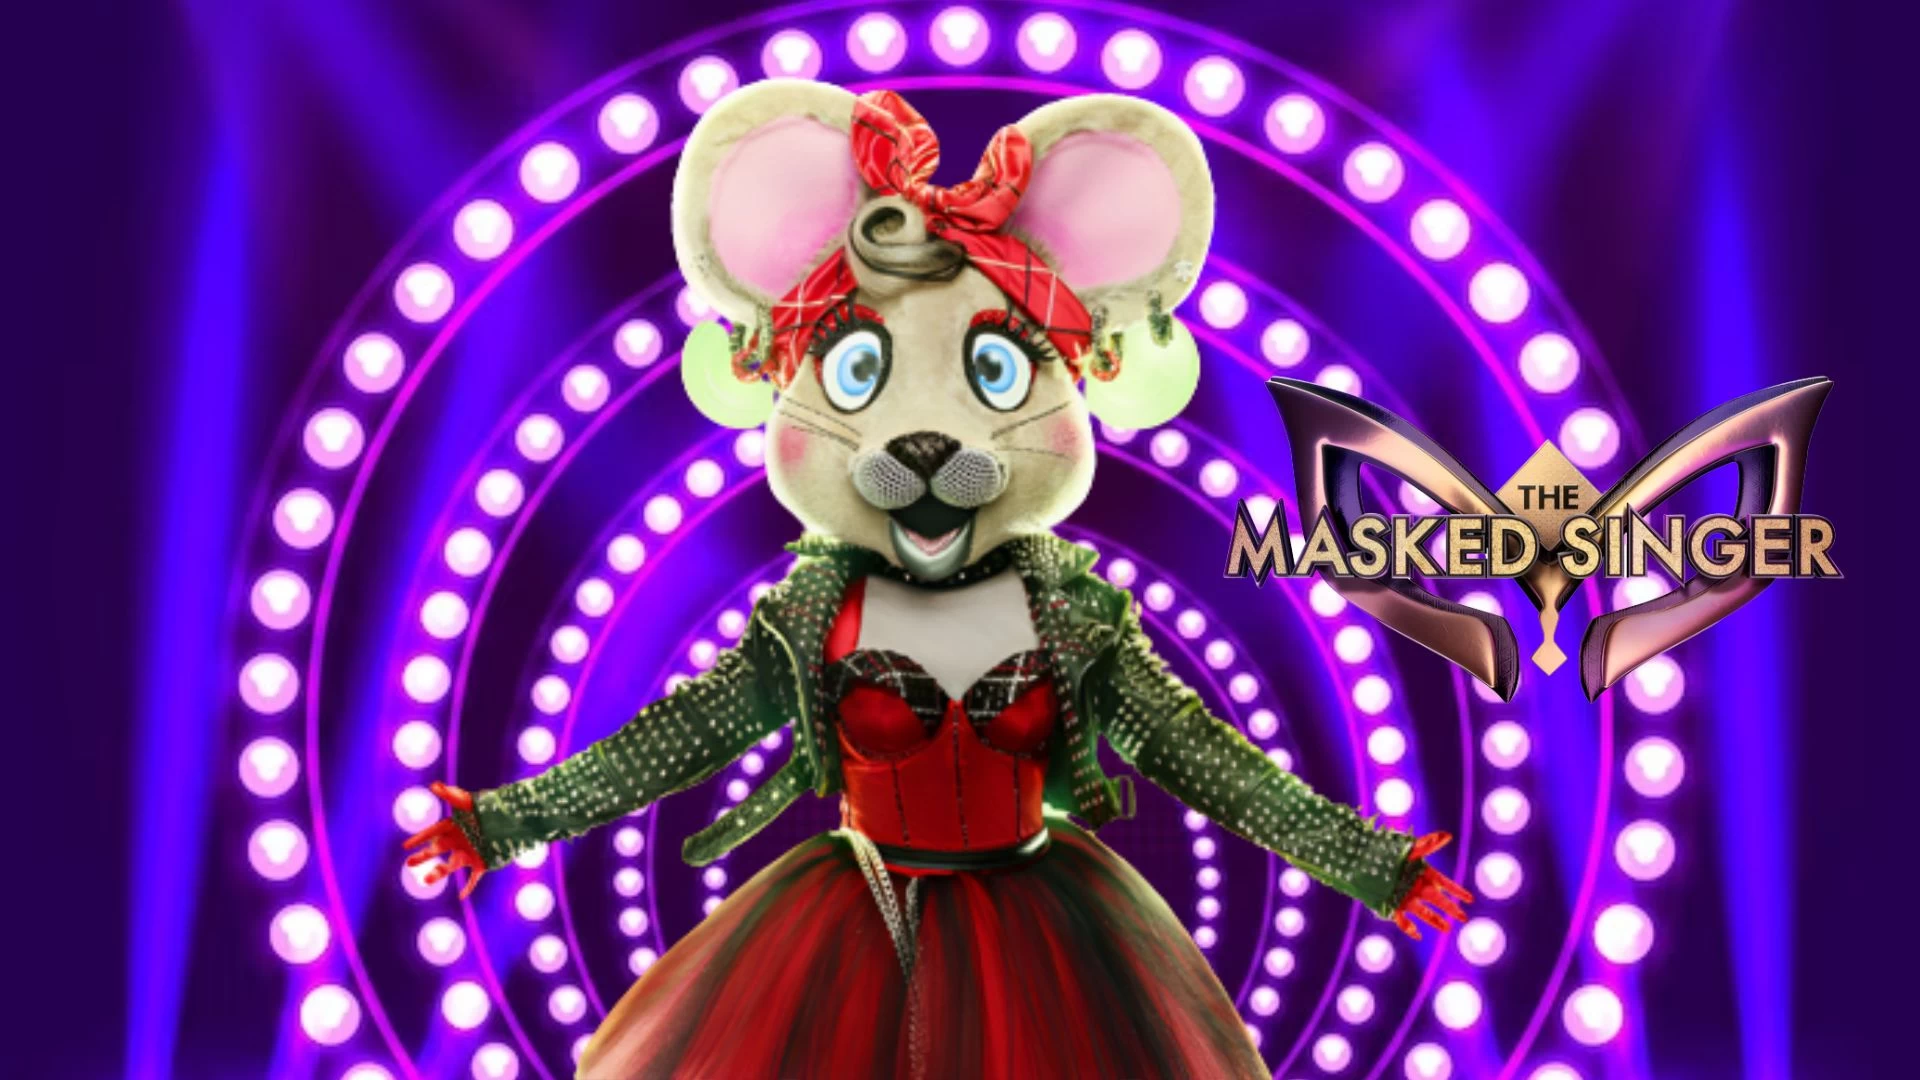 The Masked Singer Season 10 Spoilers, The Masked Singer Season 10 Episode 3 Recap, The Masked Singer Plot and Cast